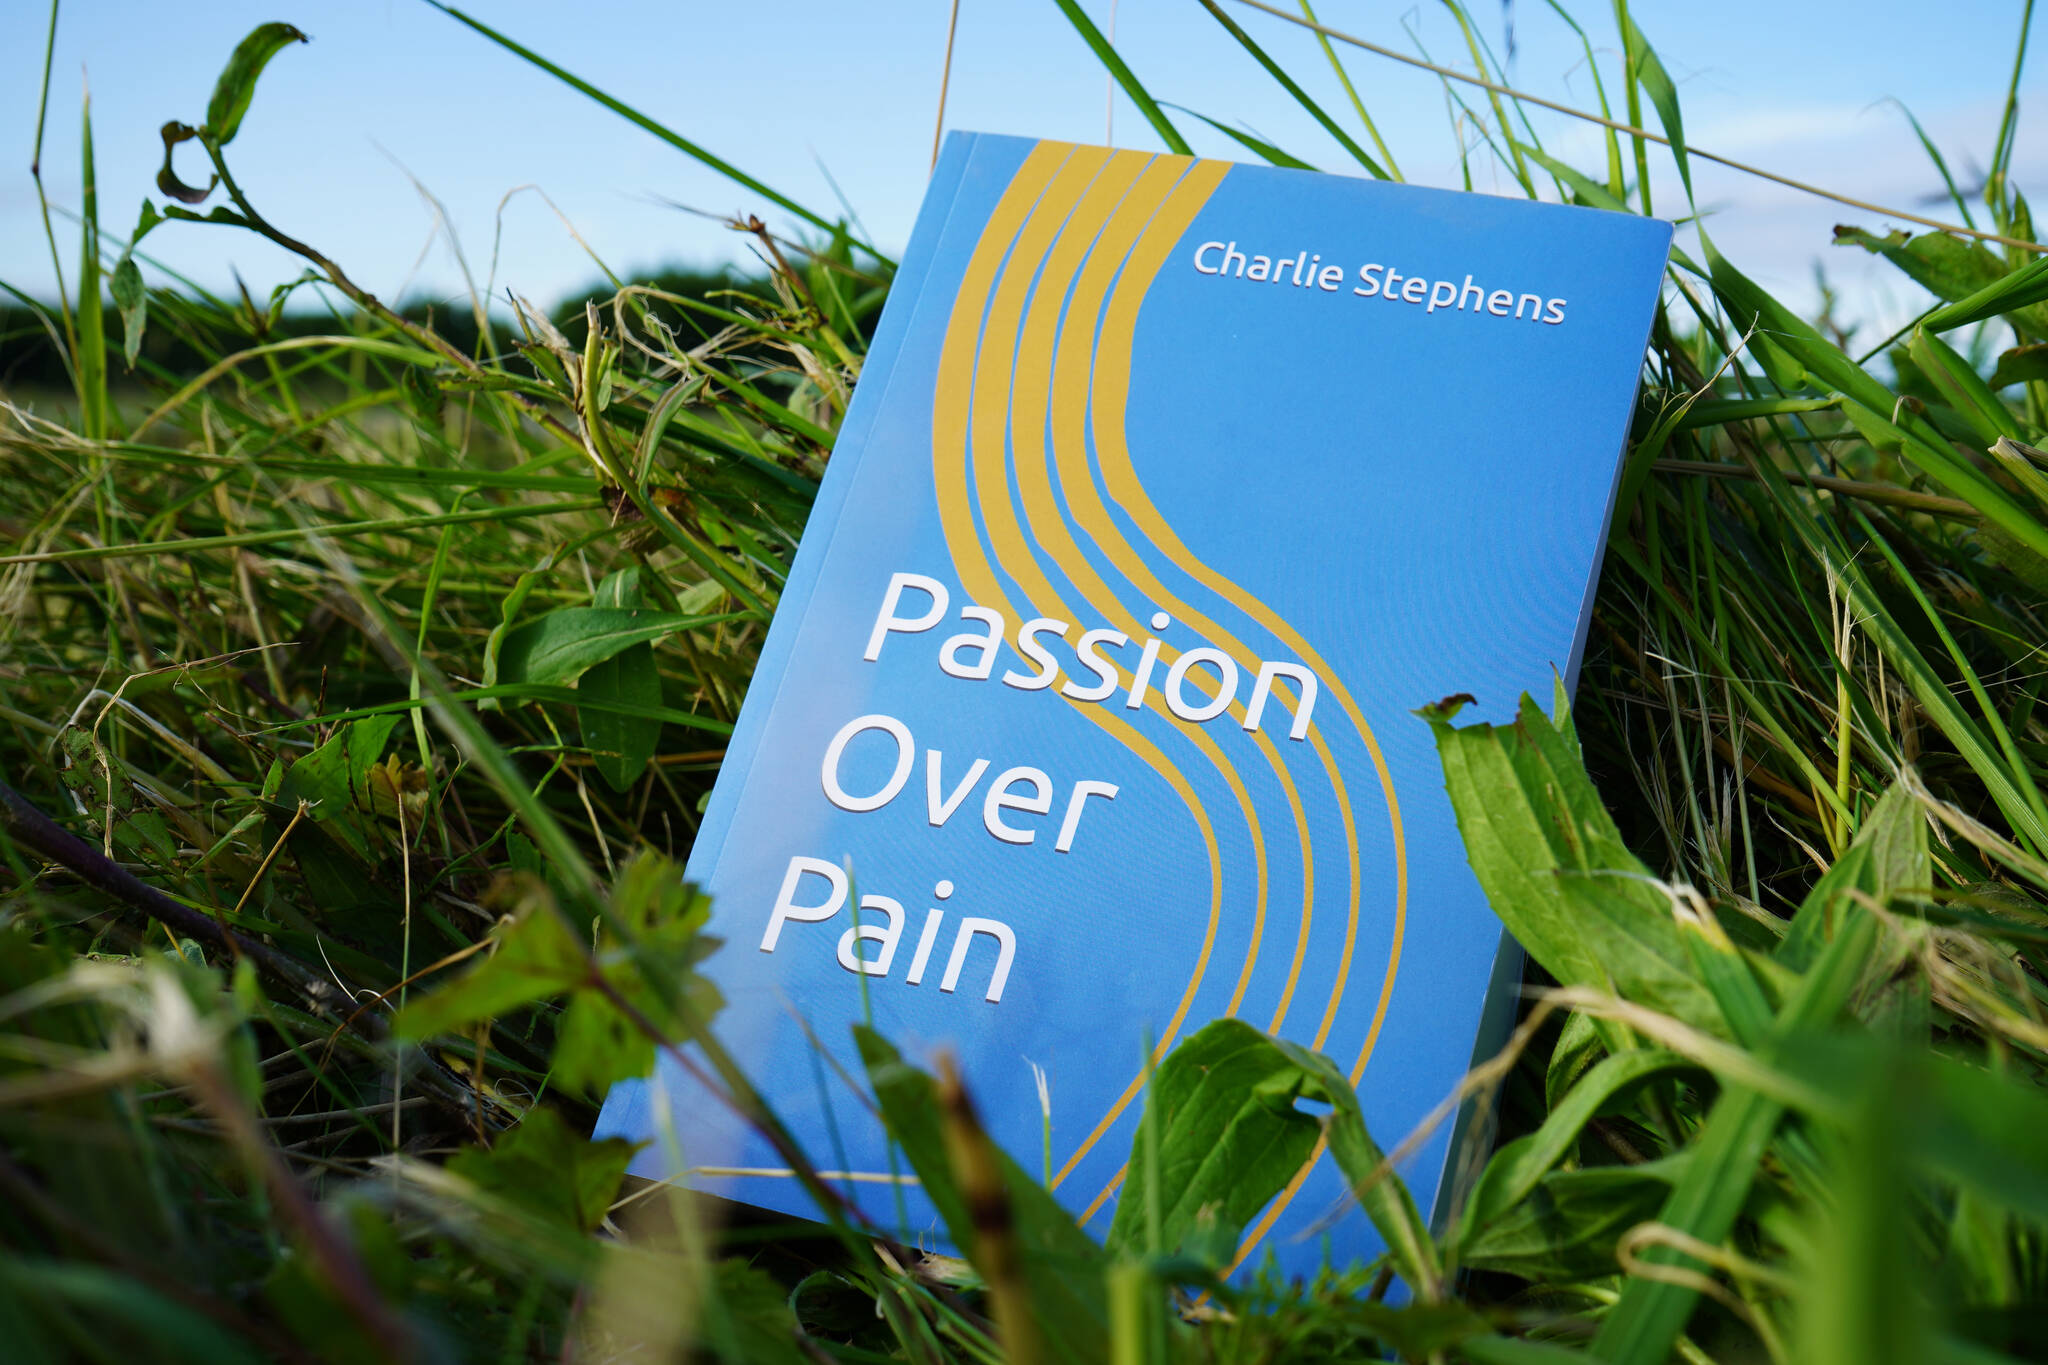 A copy of Charlie Stephens' "Passion Over Pain" rests in grass on Wednesday, July 12, 2023, in Soldotna, Alaska. (Jake Dye/Peninsula Clarion)